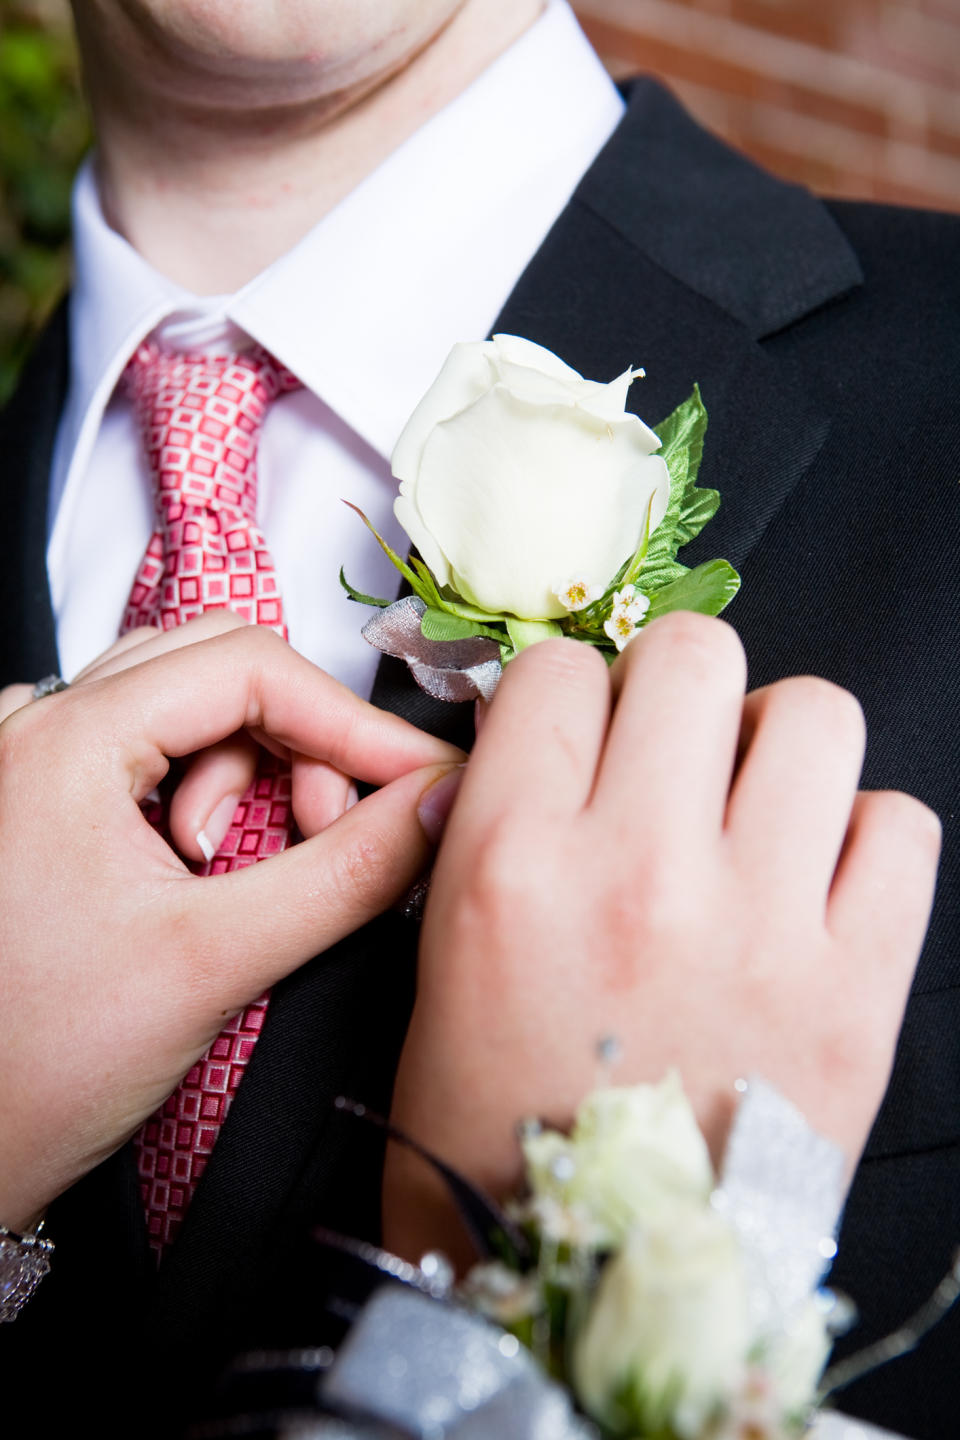 a person fastening a flower on a man's lapel